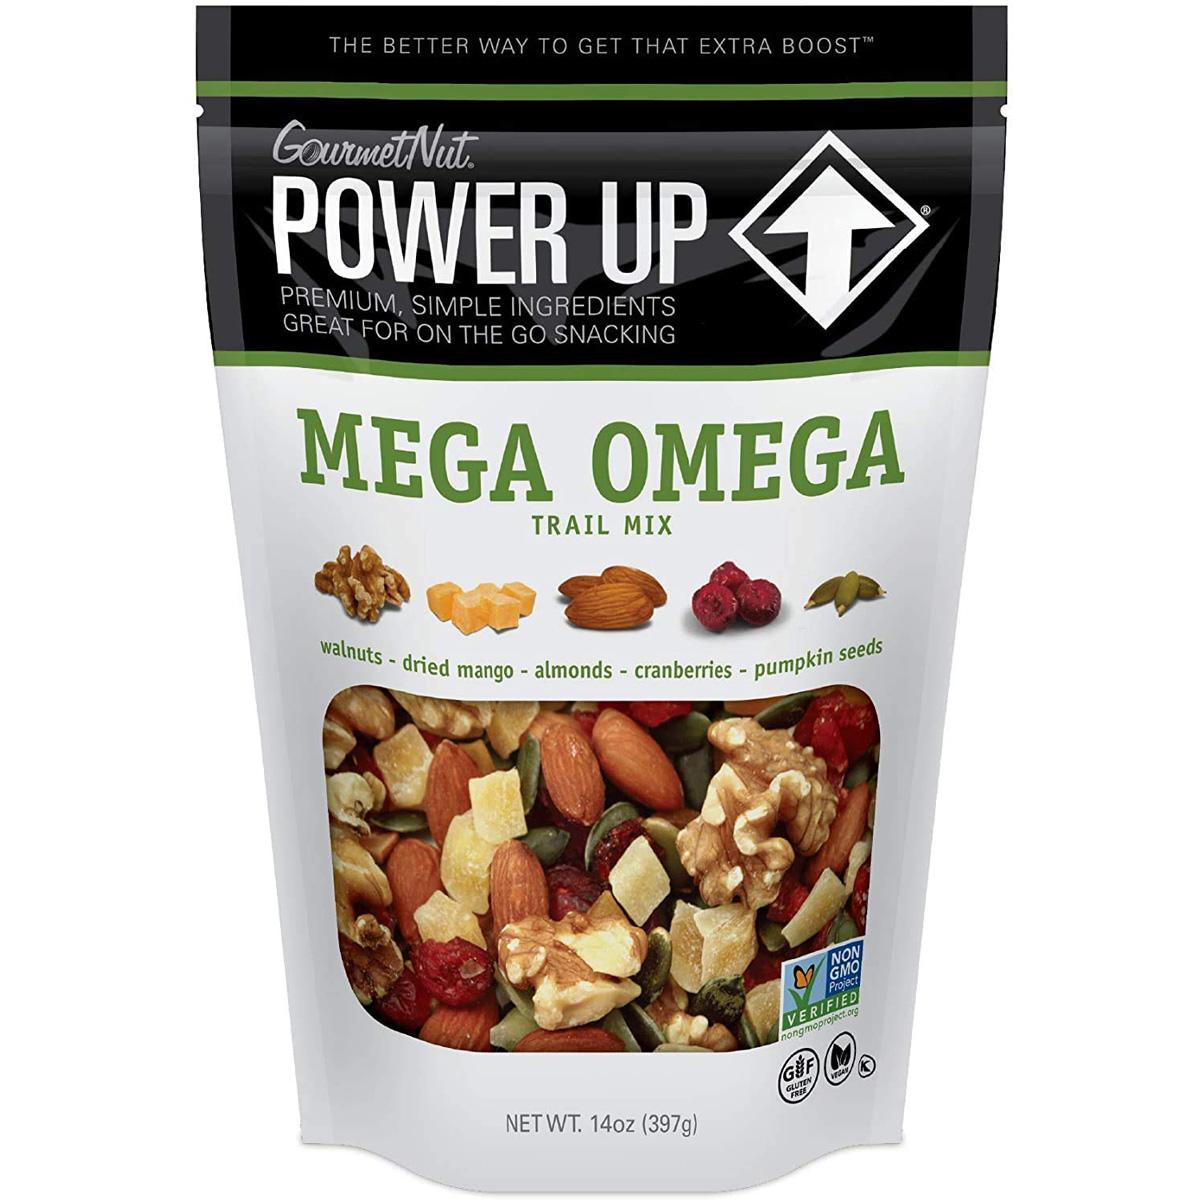 Power Up Trail Mix Gourmet Nut Bag for $3.48